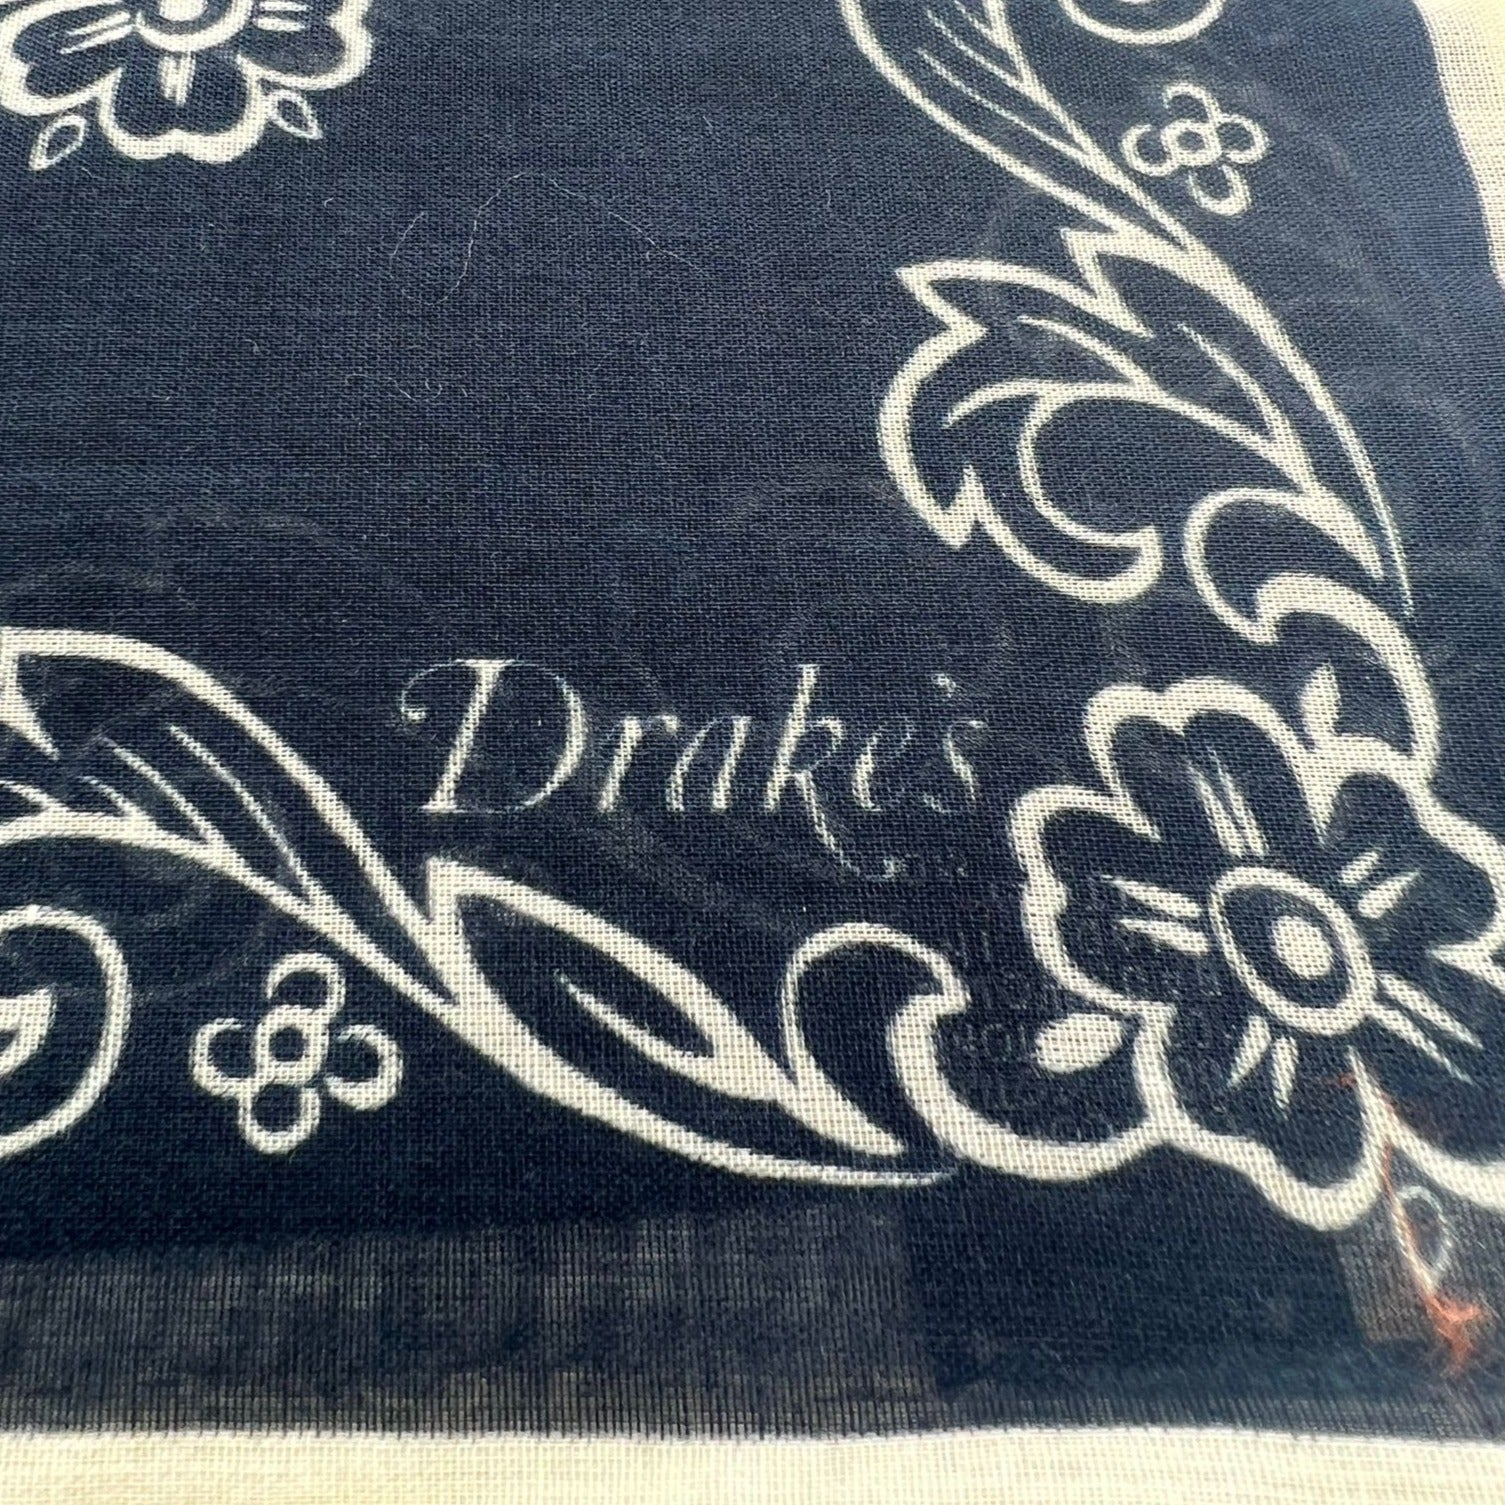 Drake's 100% Cotton Hand-rolled Blue and White -  Pocket Square Handmade in Italy 41 cm X 41cm #7422